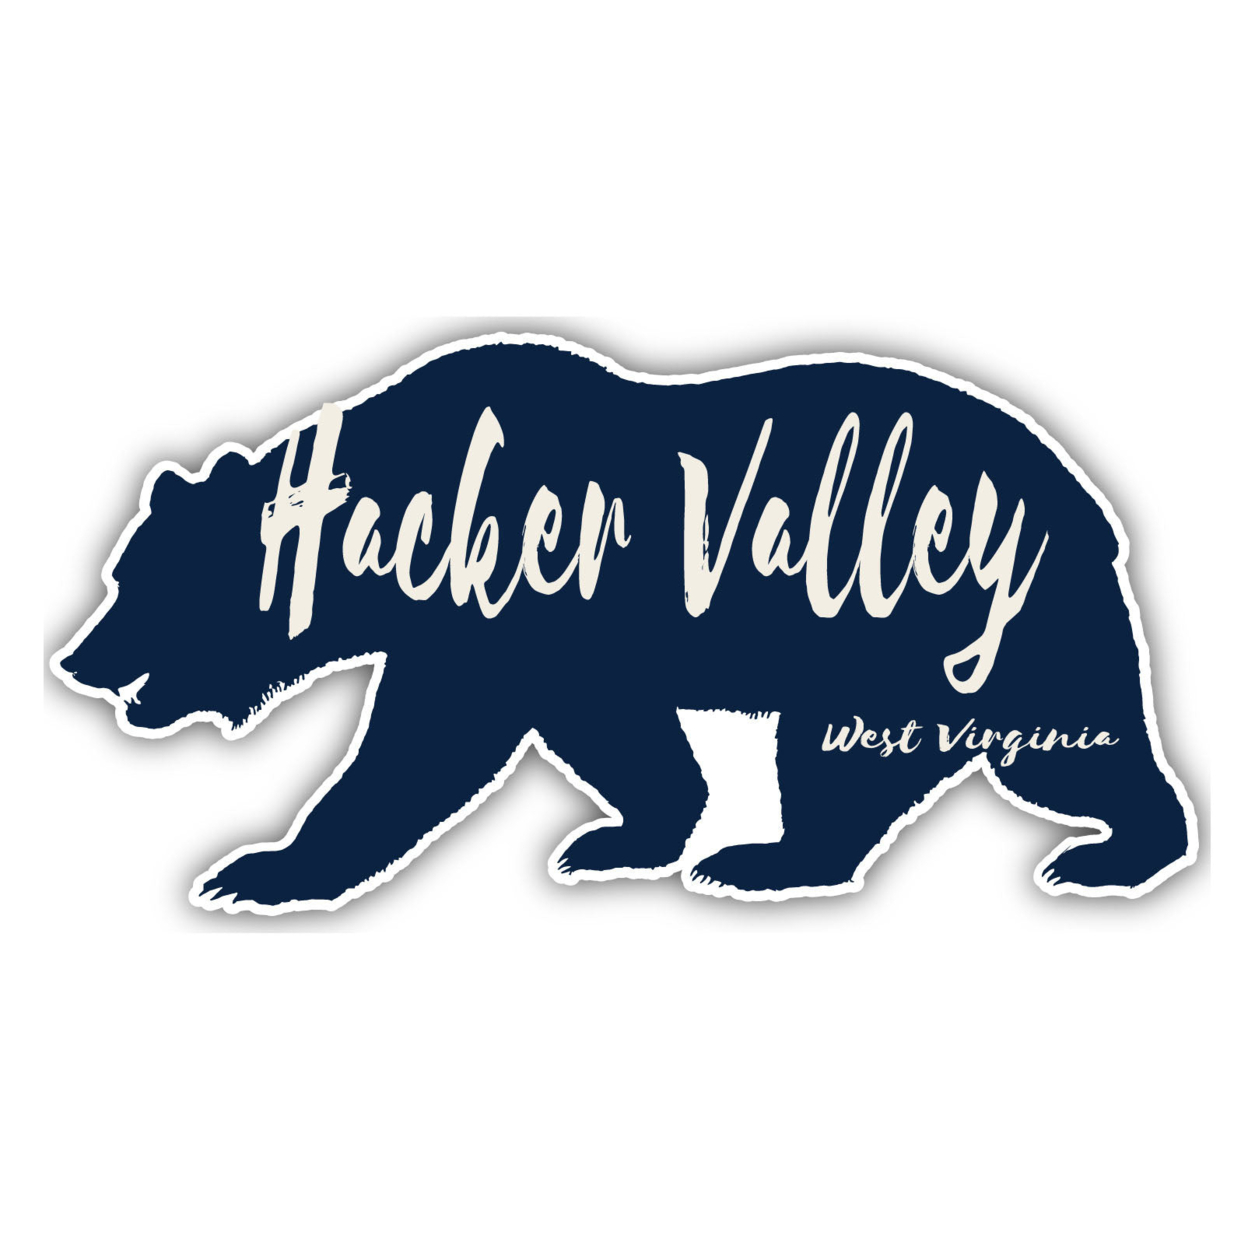 Hacker Valley West Virginia Souvenir Decorative Stickers (Choose Theme And Size) - Single Unit, 10-Inch, Great Outdoors